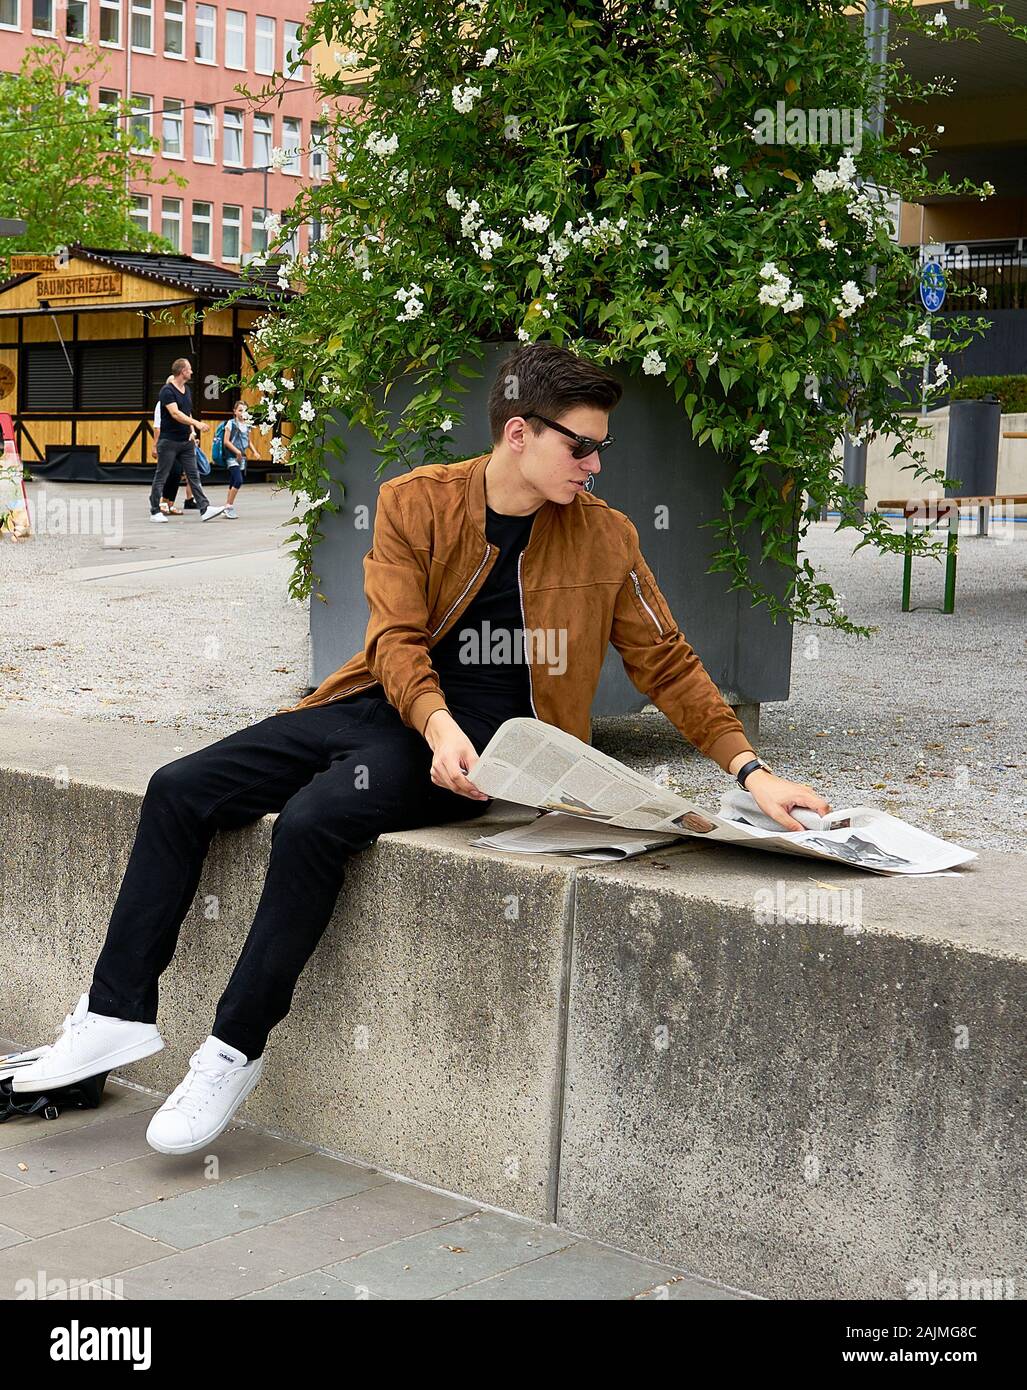 Male fashion model takes a break from photo shoot to read the newspaper, lookiing ultra cool in the process.  Germany. Stock Photo